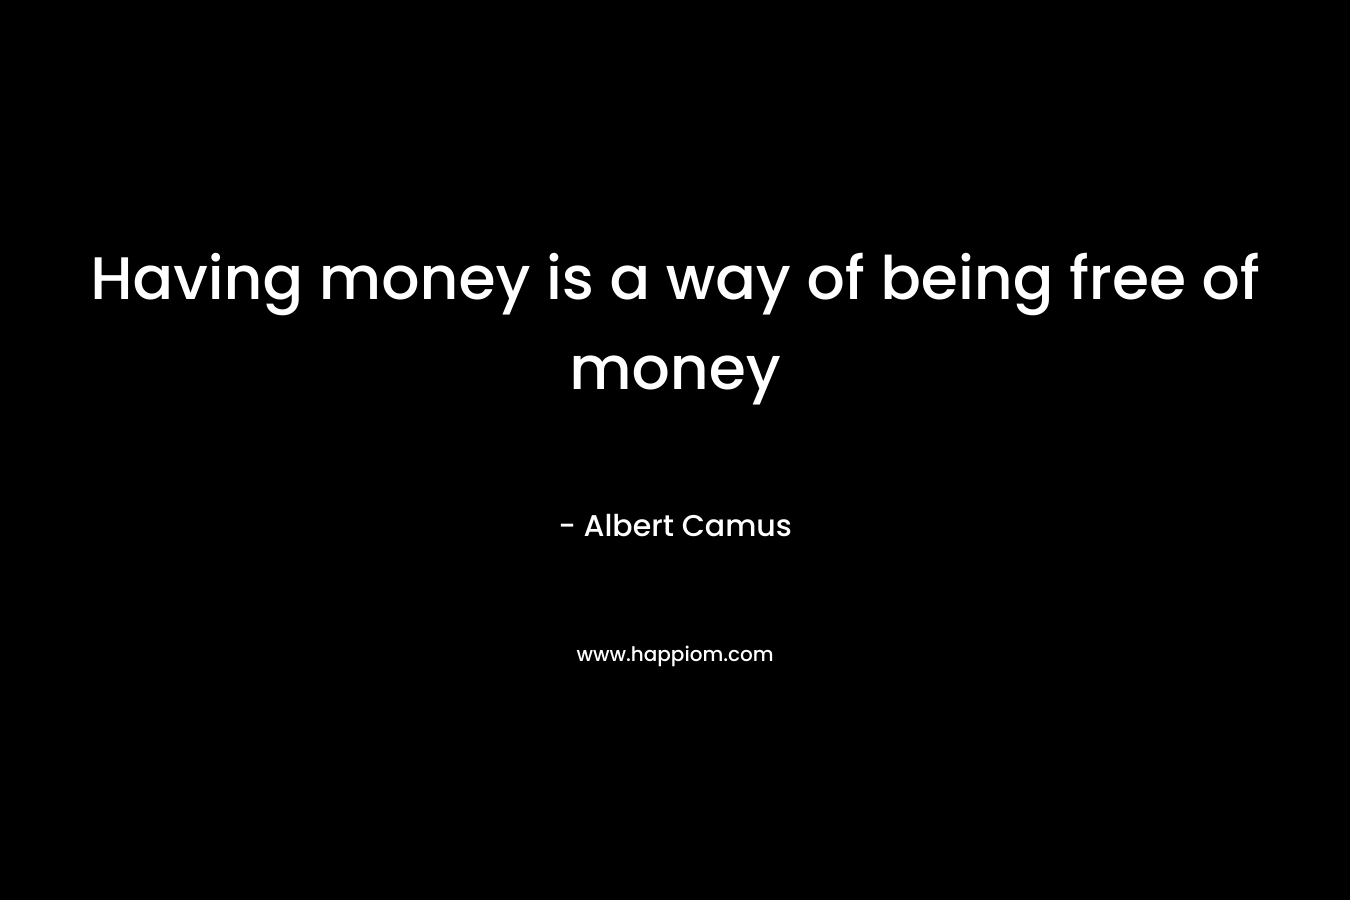 Having money is a way of being free of money